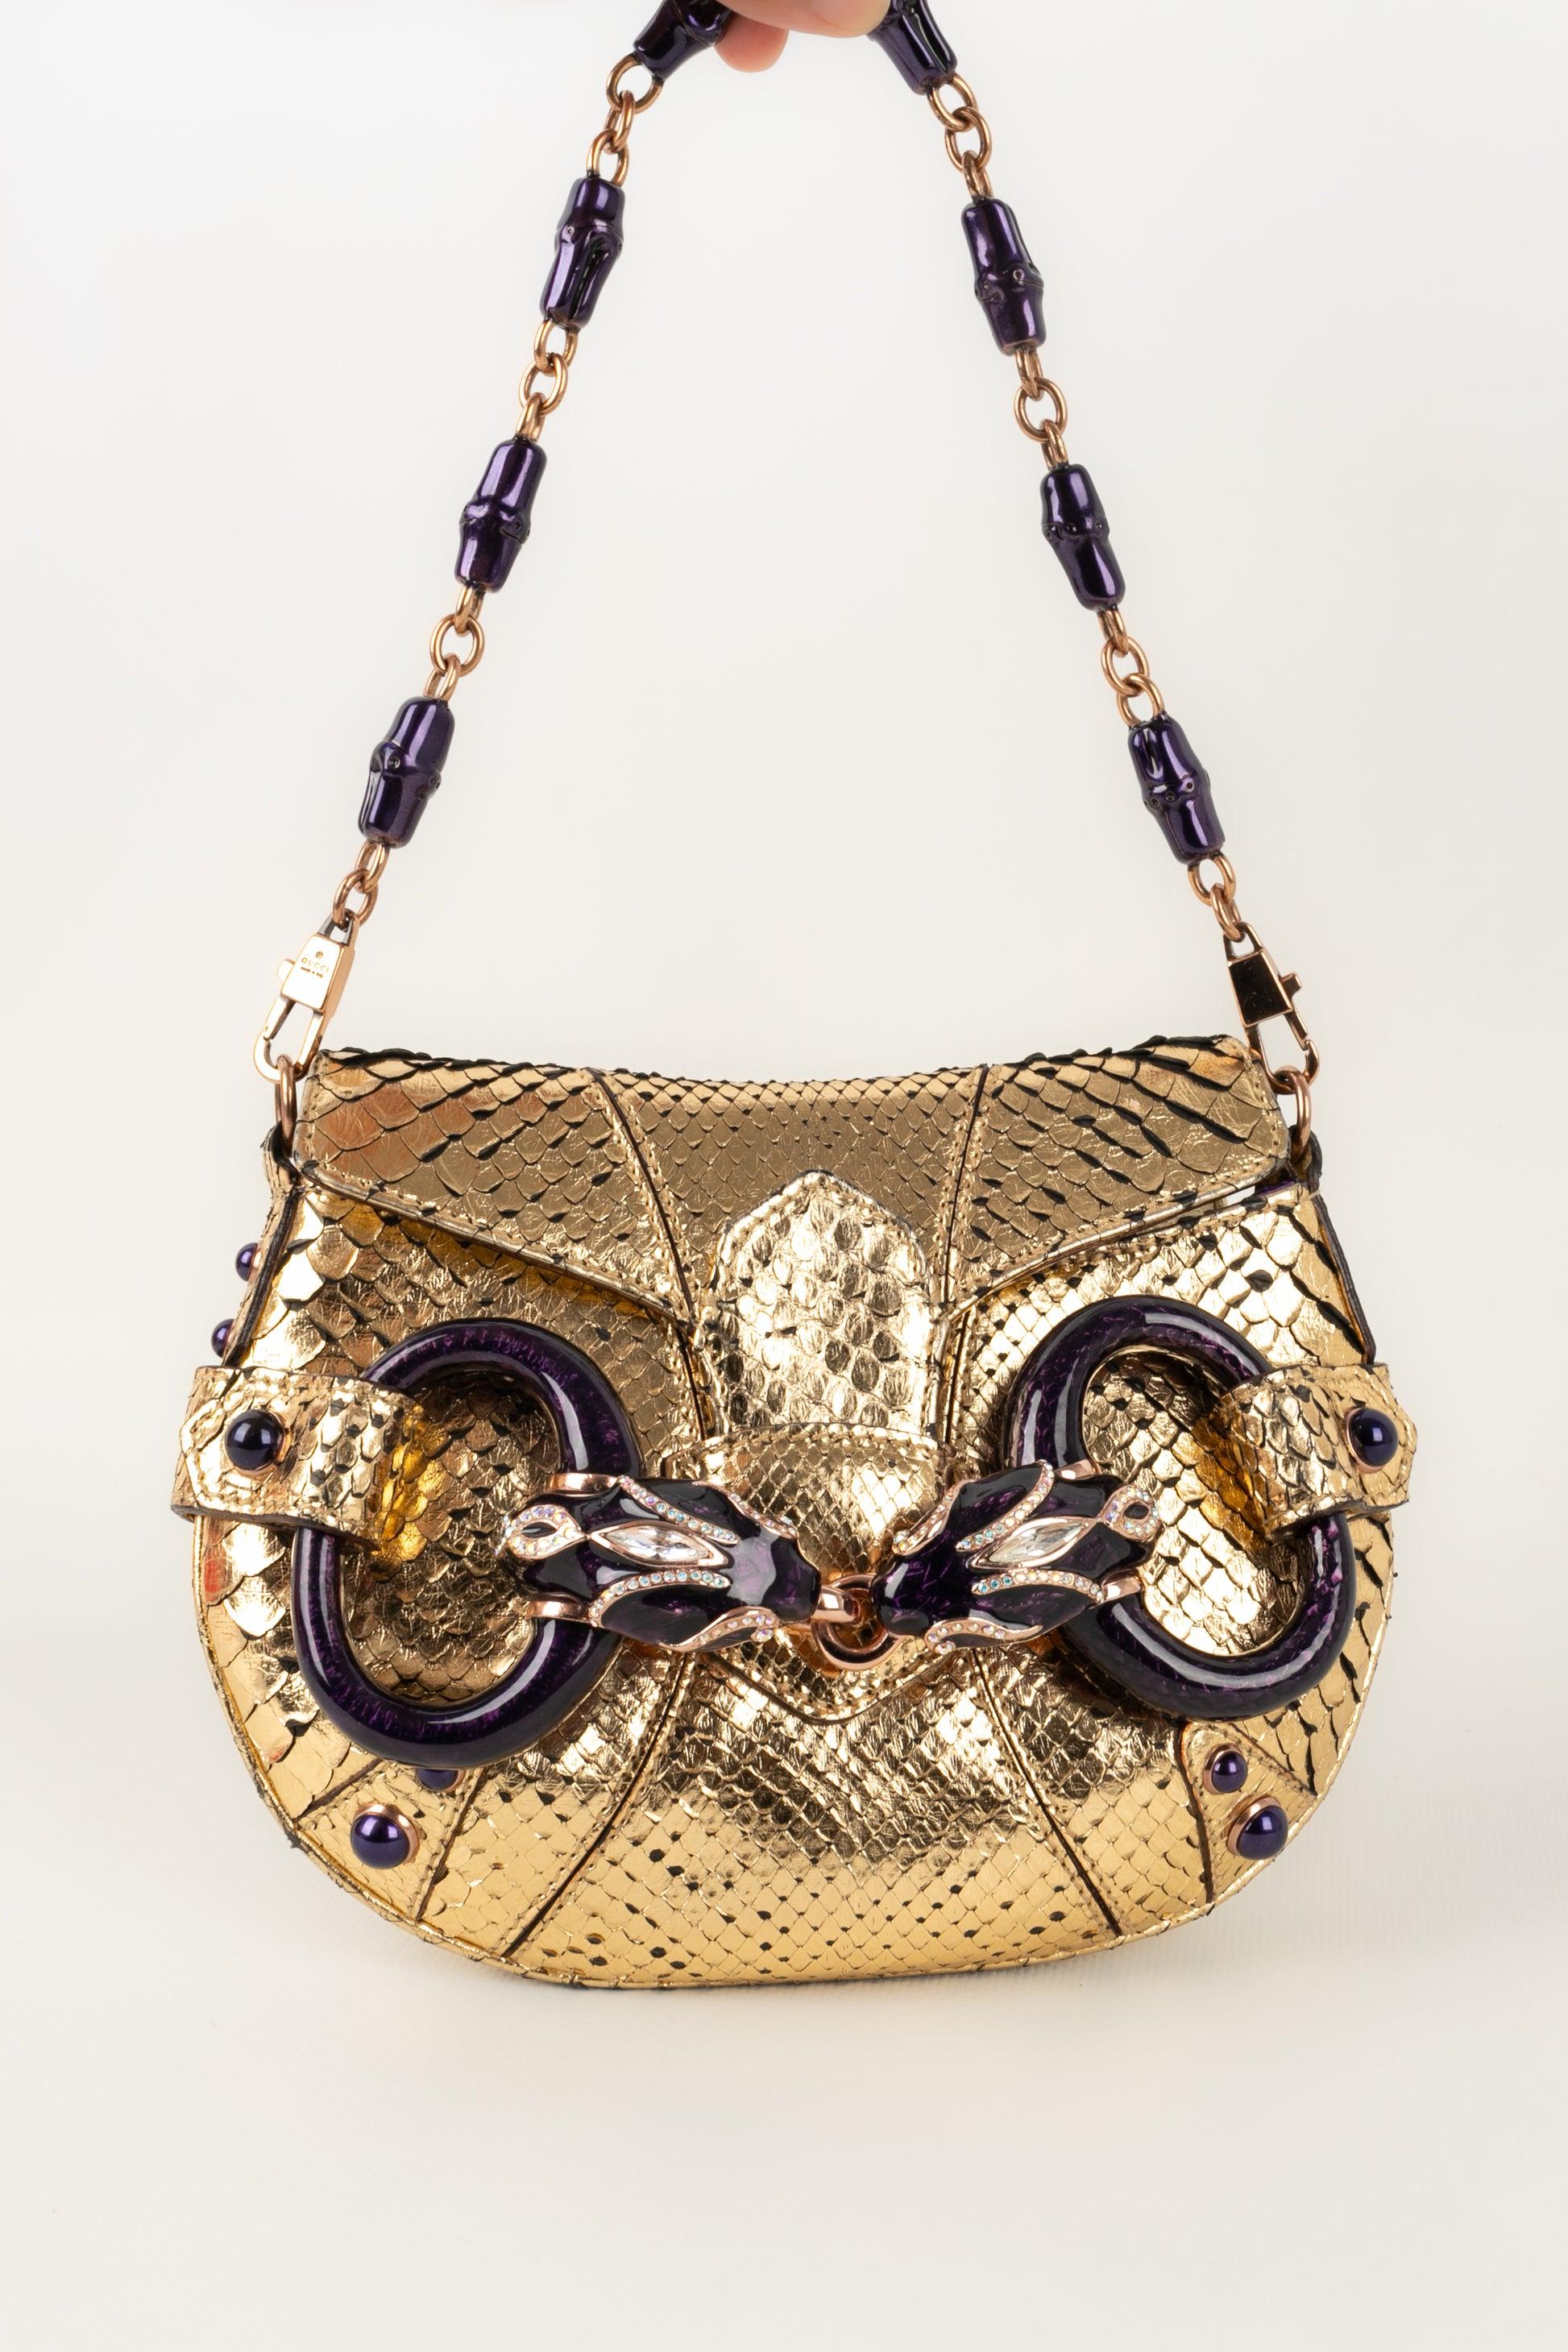 Gucci - (Made in Italy) Golden exotic leather bag with enameled metal and rhinestones. Spring/Summer 2004 Collection.

Additional information:
Condition: Very good condition
Dimensions: Length: 20 cm - Height: 15 cm - Depth: 3 cm - Handle: 42